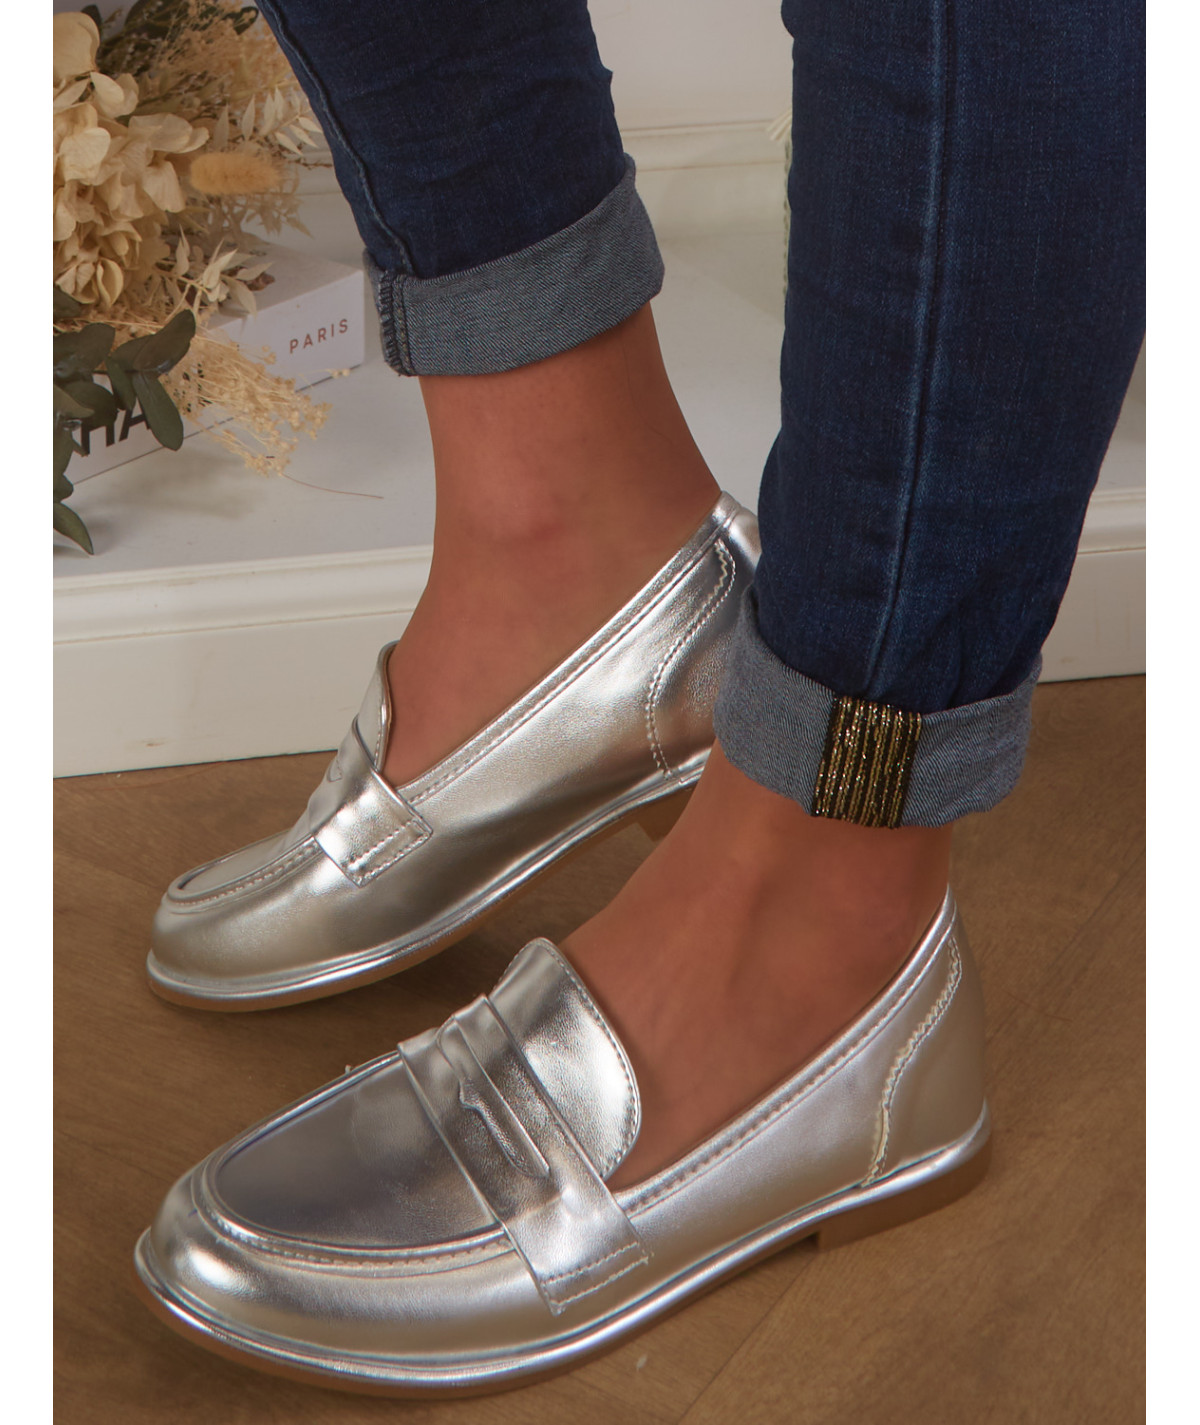 silver moccasin